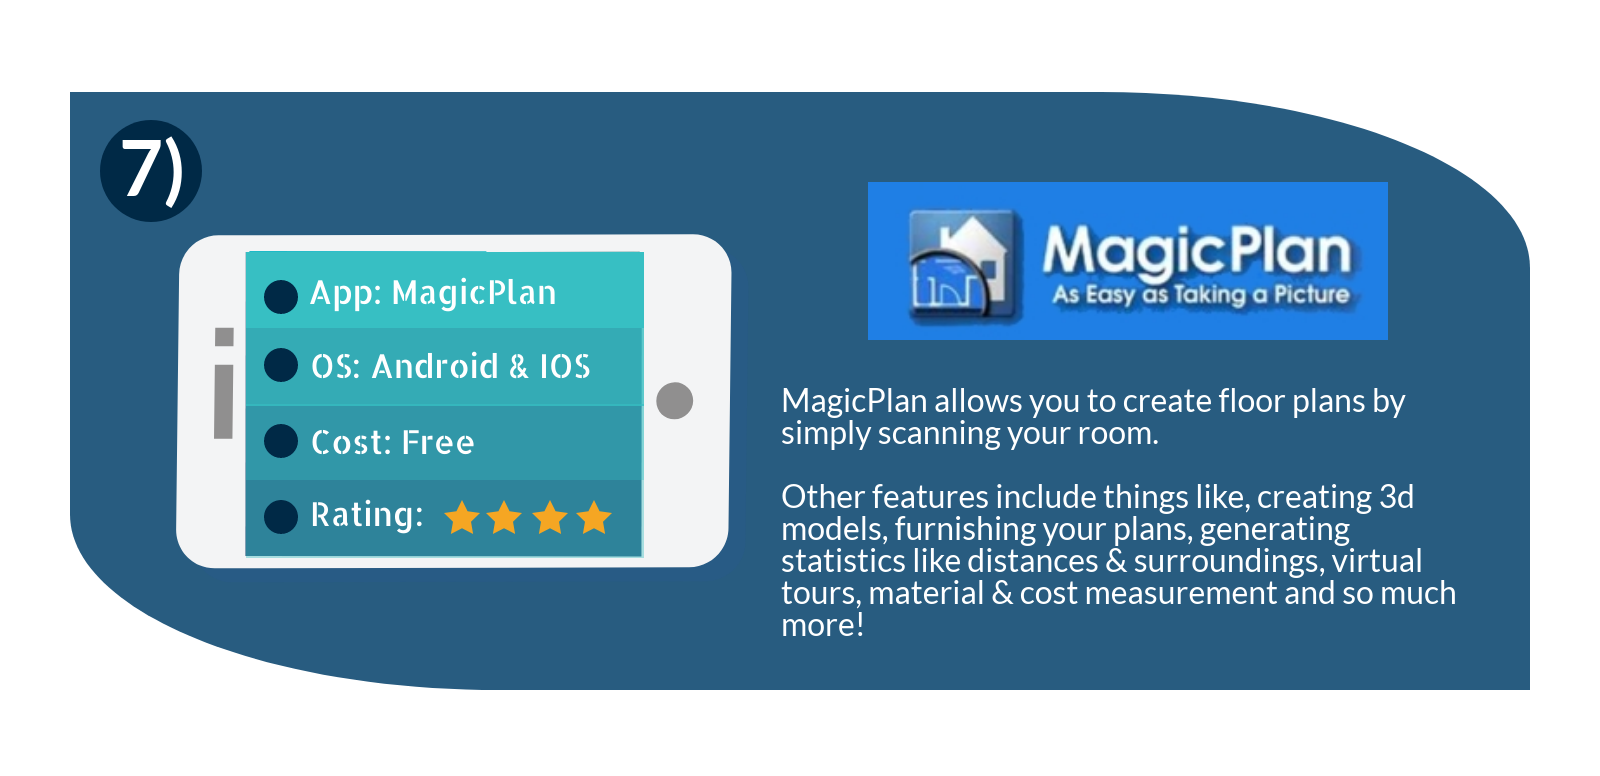 Magic plan is a great app that allows you to create floor plans